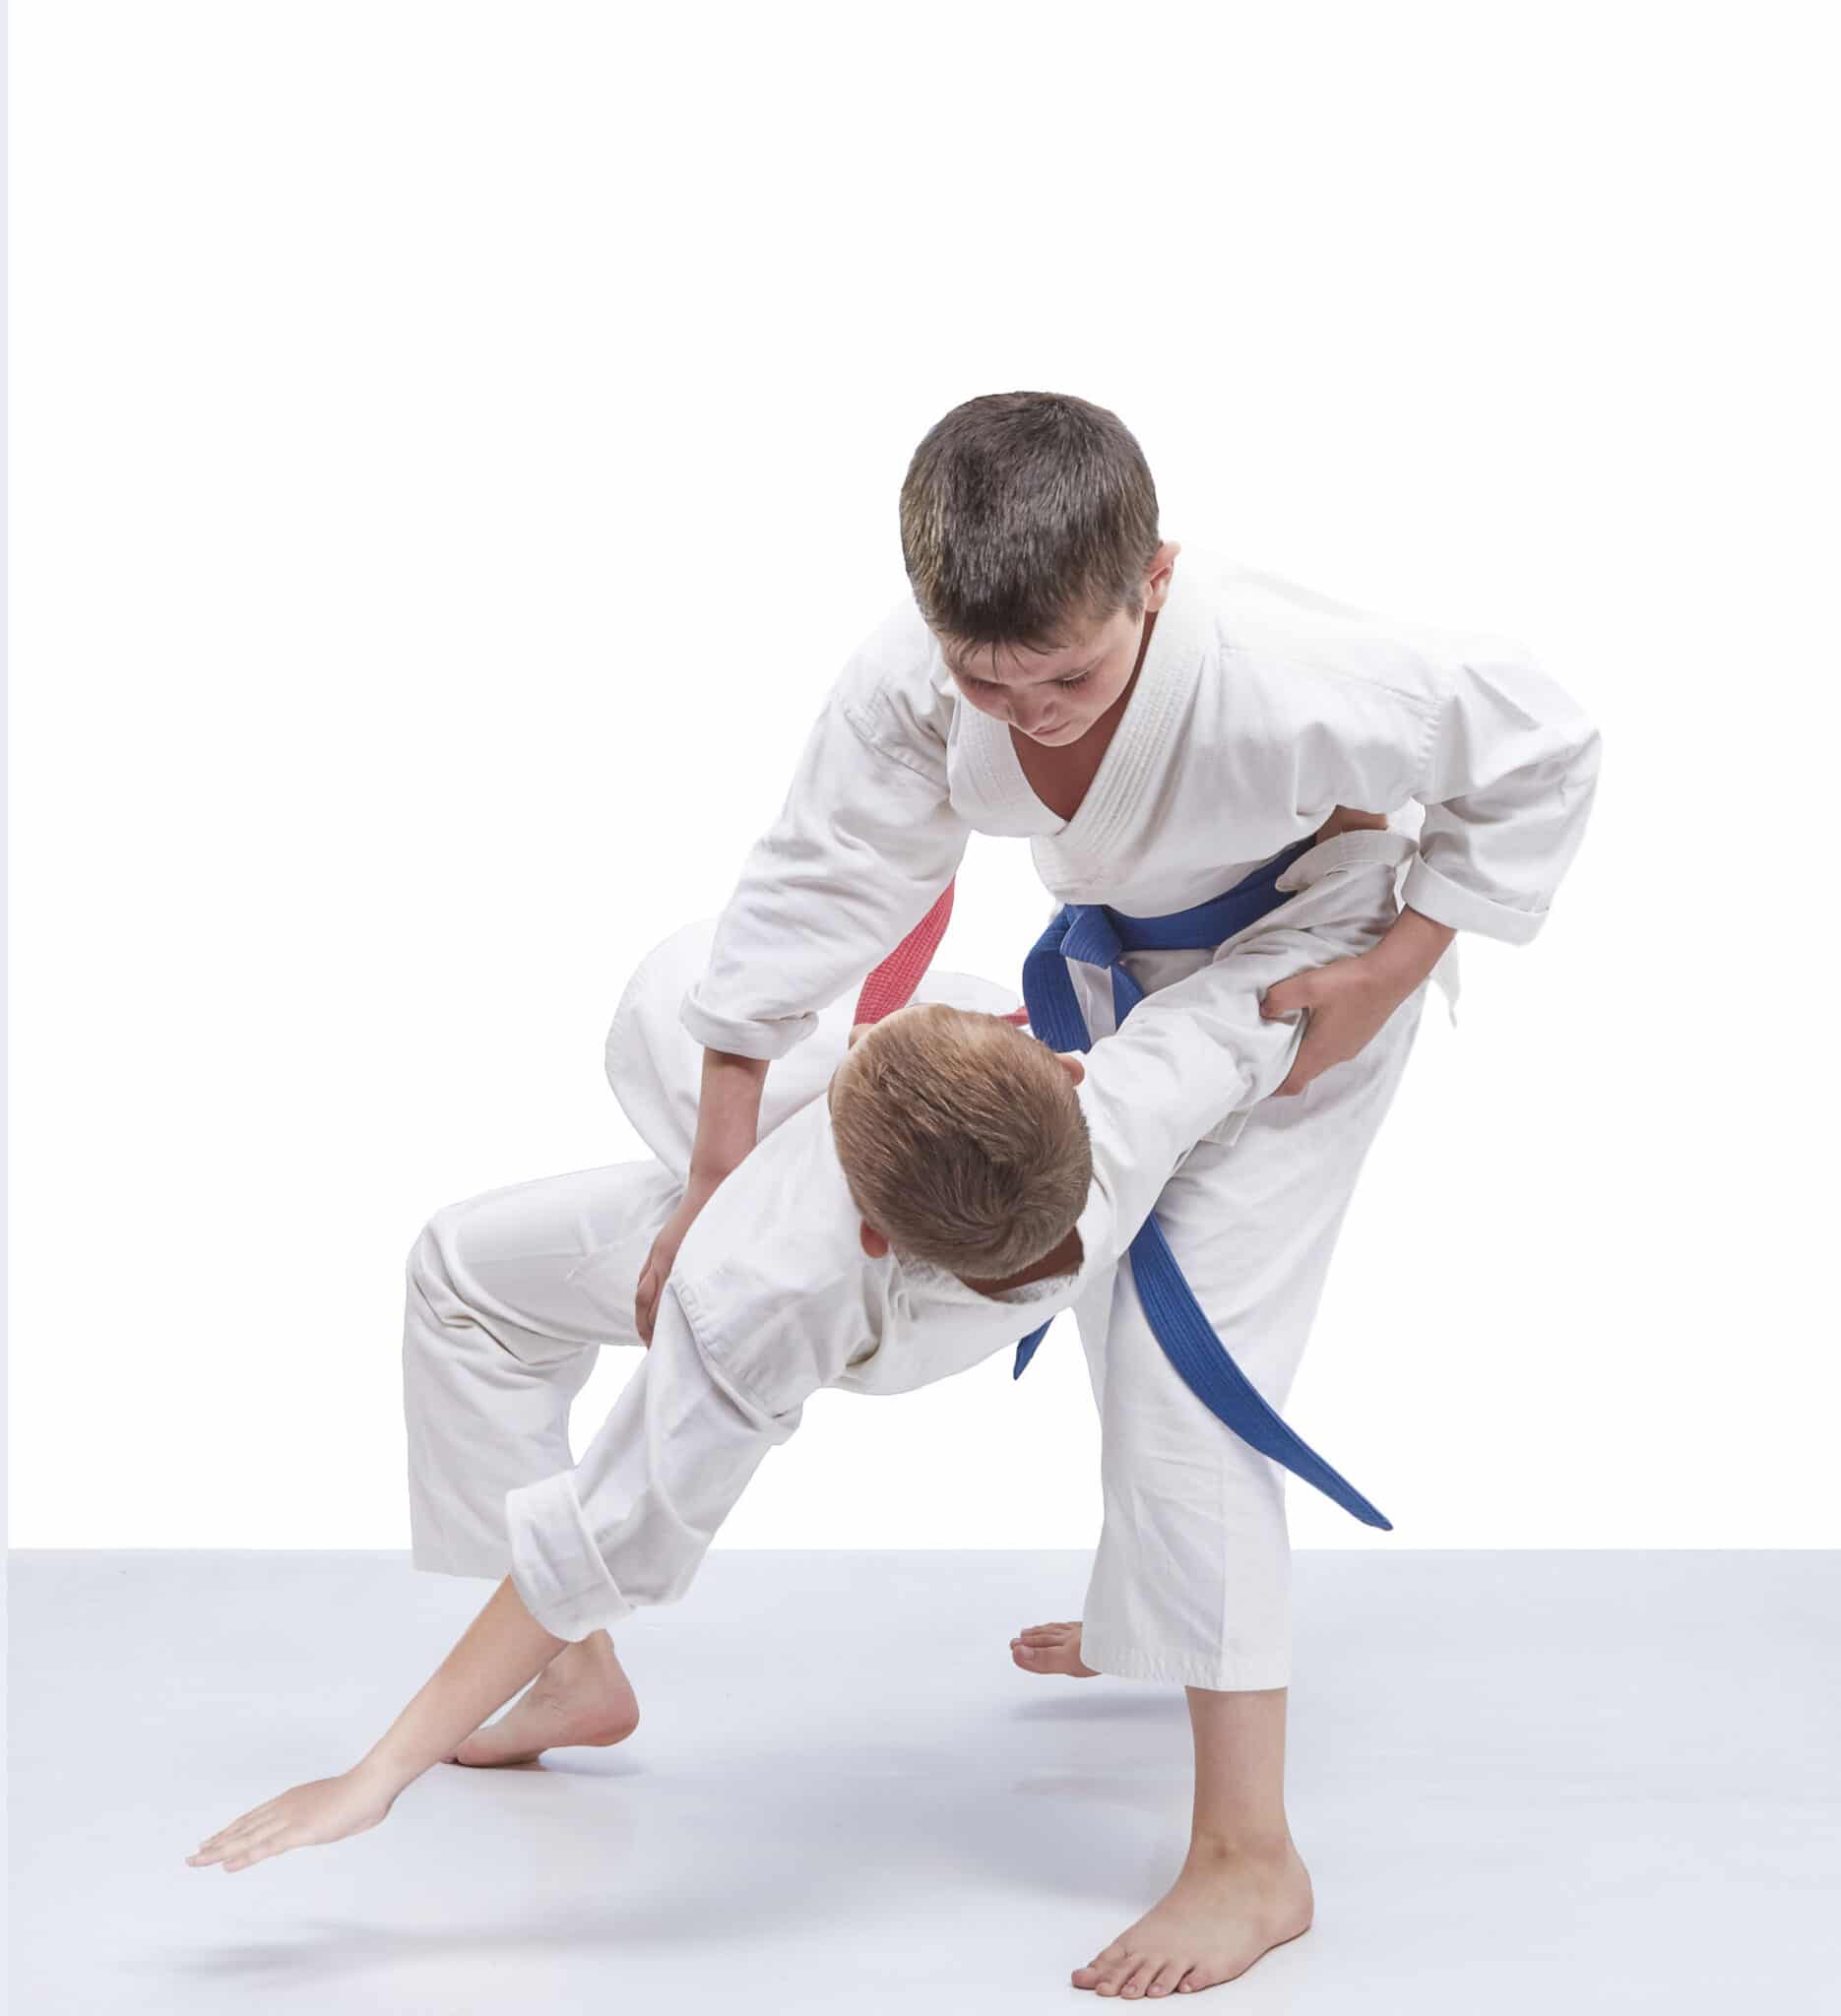 Miami Martial Arts & Fitness Kids BJJ Ages 5-7 and 8-12